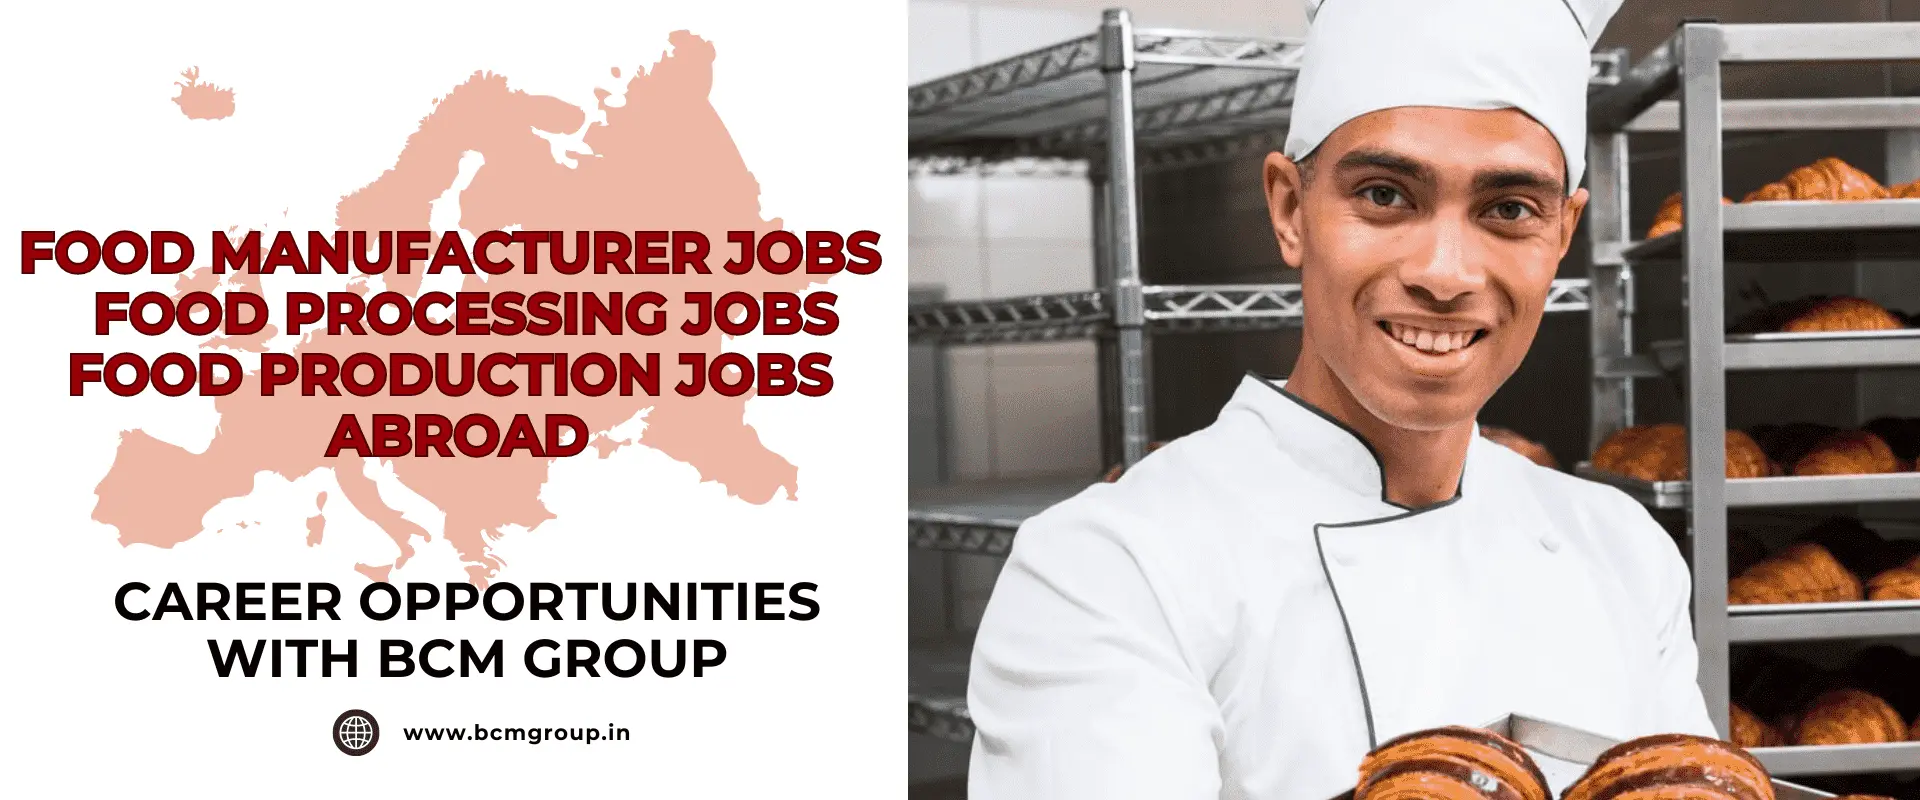 FOOD MANUFACTURER JOBS | FOOD PROCESSING & PRODUCTION JOBS  ABROAD